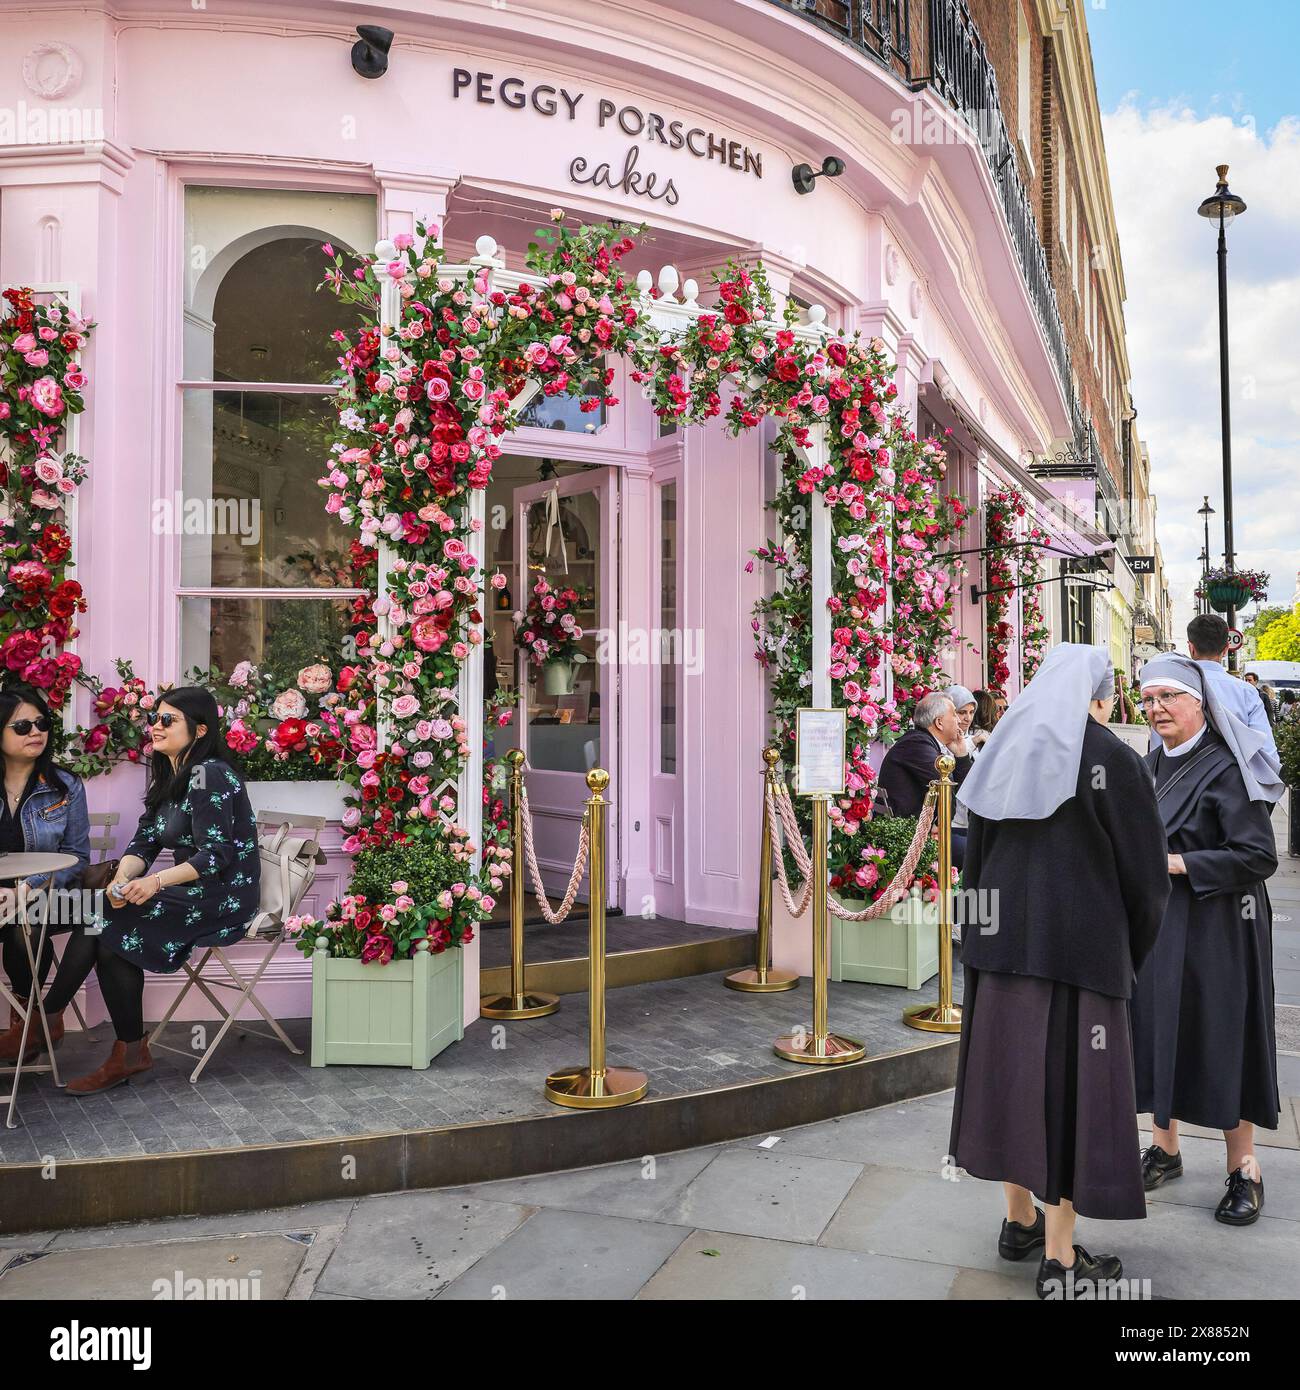 London, UK. 23rd May, 2024. Two nuns admire the display at Peggy Porschen Cakes. The Belgravia in Bloom Festival is returning for its ninth year with a 'Floral Fun and Games' theme. Shops and businesses feature colourful plant and flower displays for this vibrant festival every year. Credit: Imageplotter/Alamy Live News Stock Photo